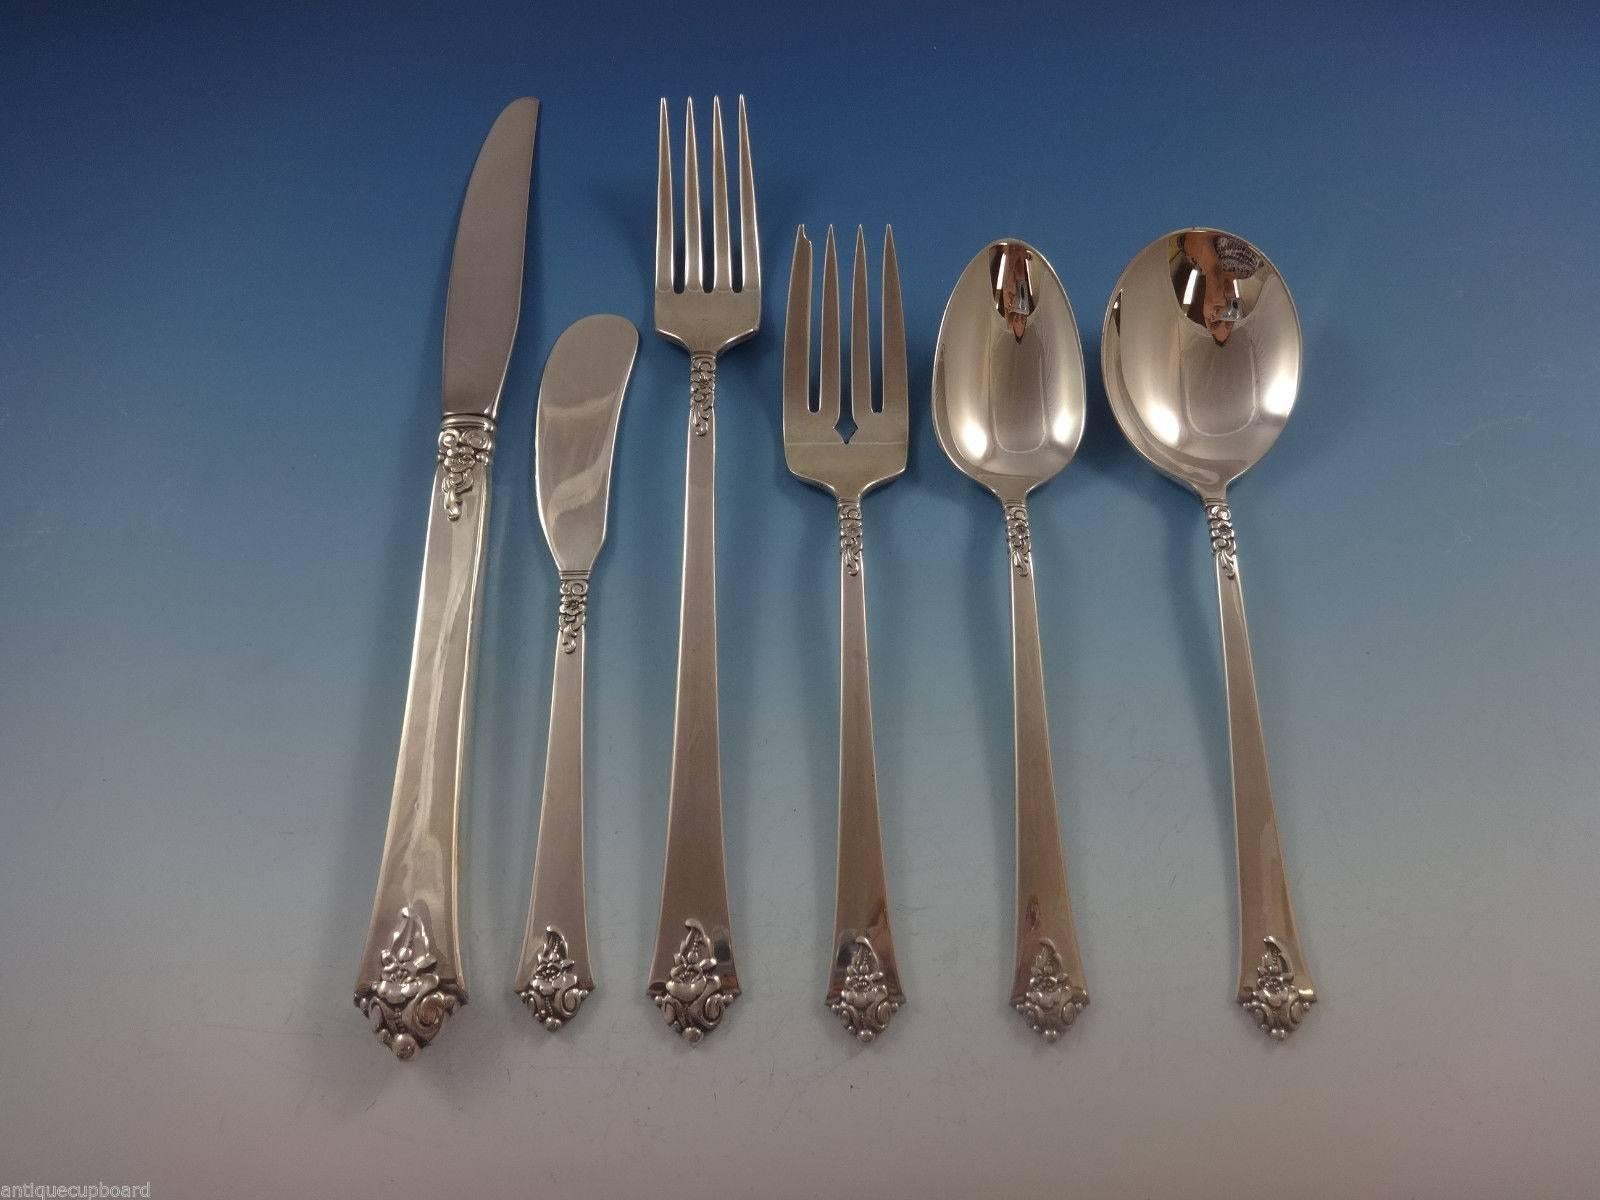 Beautiful Castle Rose by Royal Crest sterling silver flatware set, grille size (with long handles on the knife and fork) - 48 pieces. This set includes:

Eight grille knives, 8 1/4